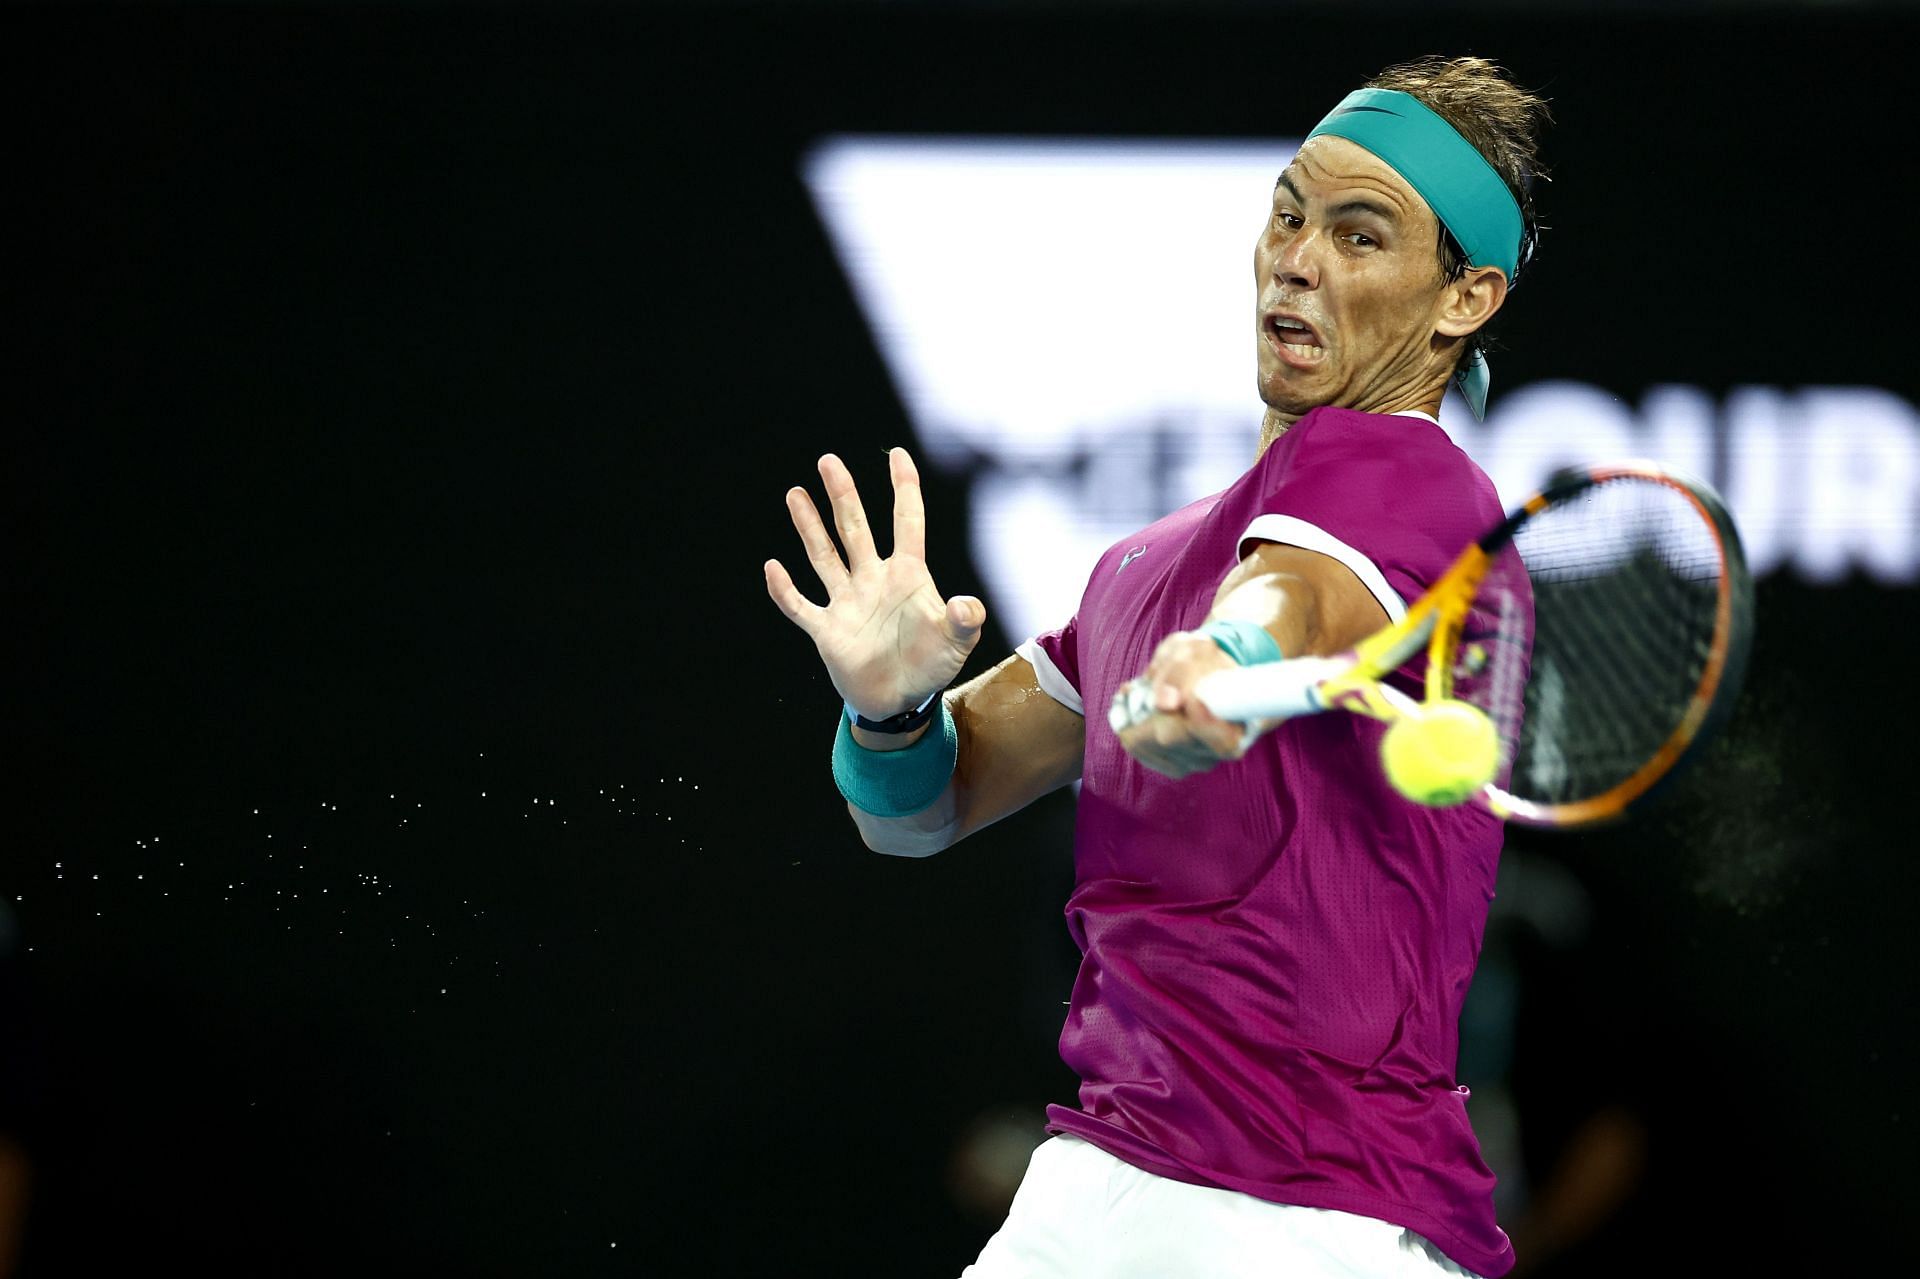 The Spanish bull hits a forehand at the 2022 Australian Open